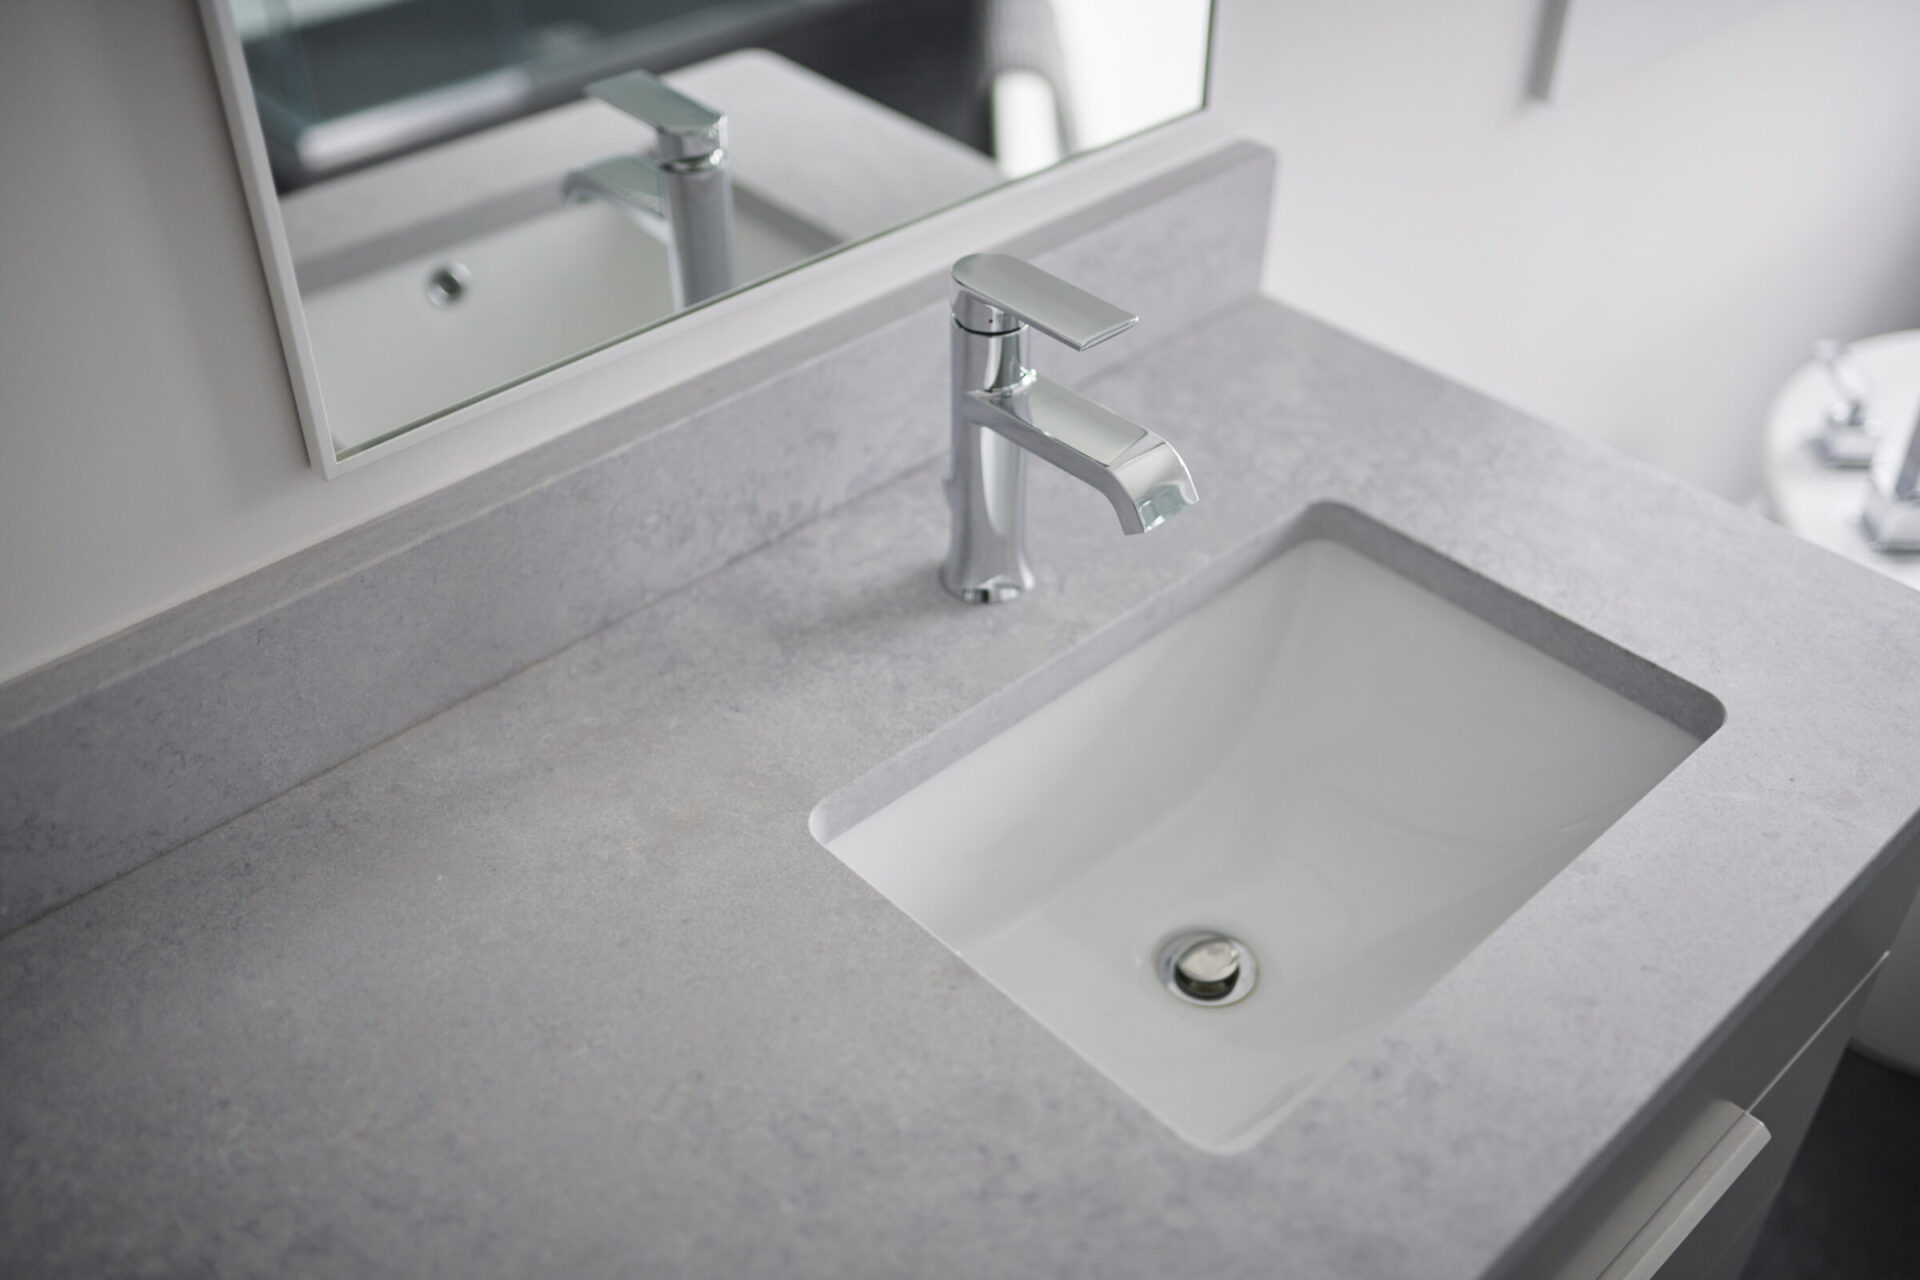 A modern bathroom sink with a chrome faucet set on a gray countertop, with a mirror reflecting the basin above.